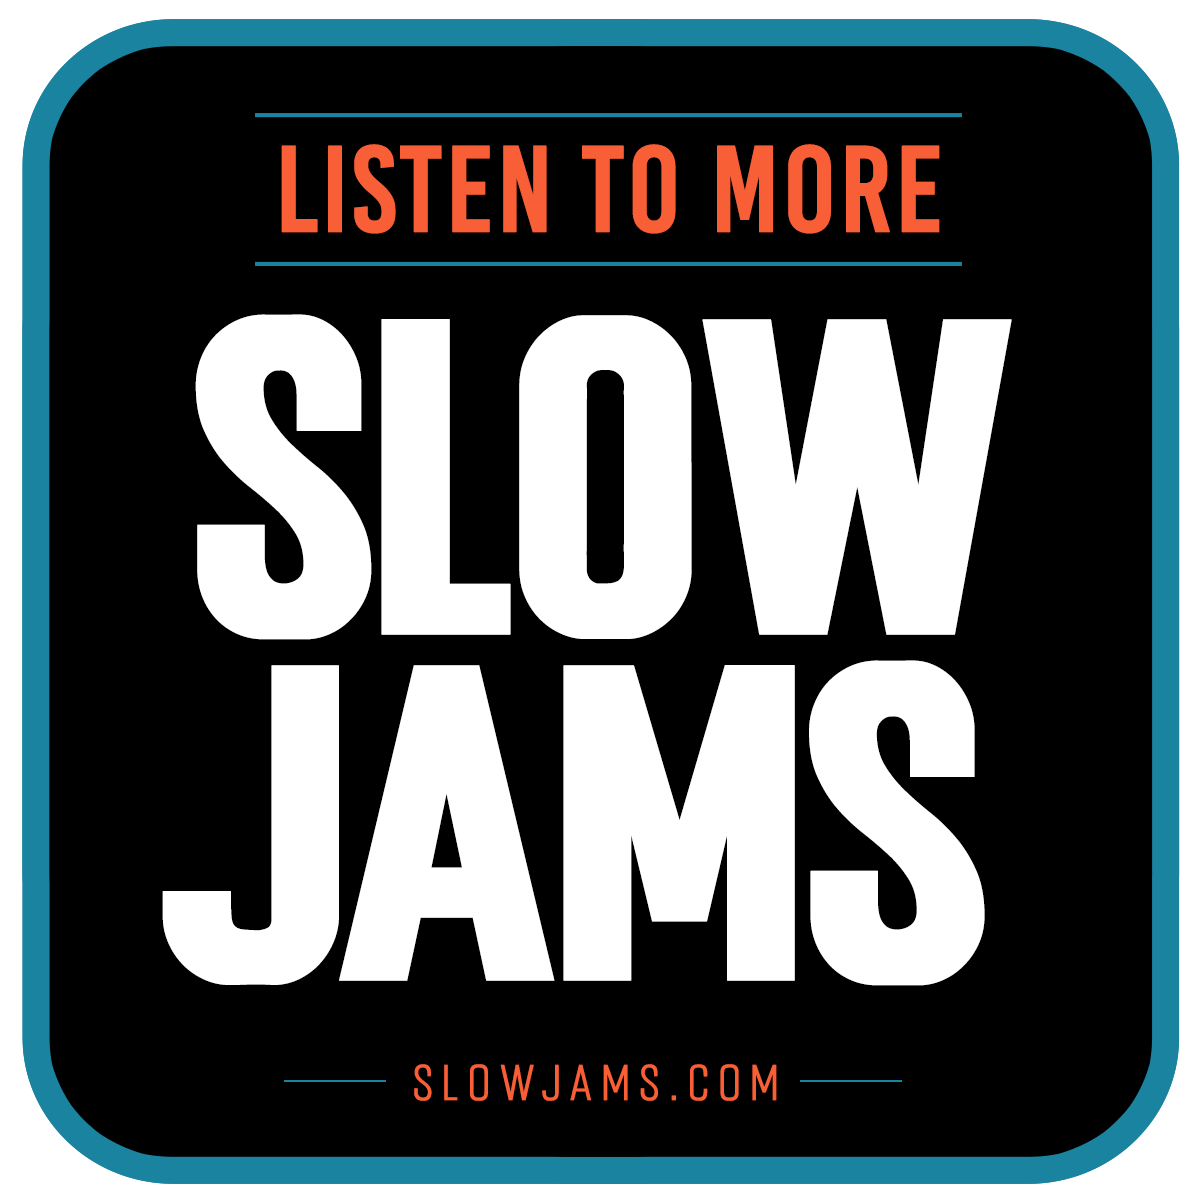 🎶 Wednesday Night Slow Jams 🎶 is back at 6! 🕗 Get ready to jam out with us - wherever you are - radio, computer, smartphone or smart speaker! 📻 💻 📱 💬 #slowjams #wednesdaynight #tunein 🔊